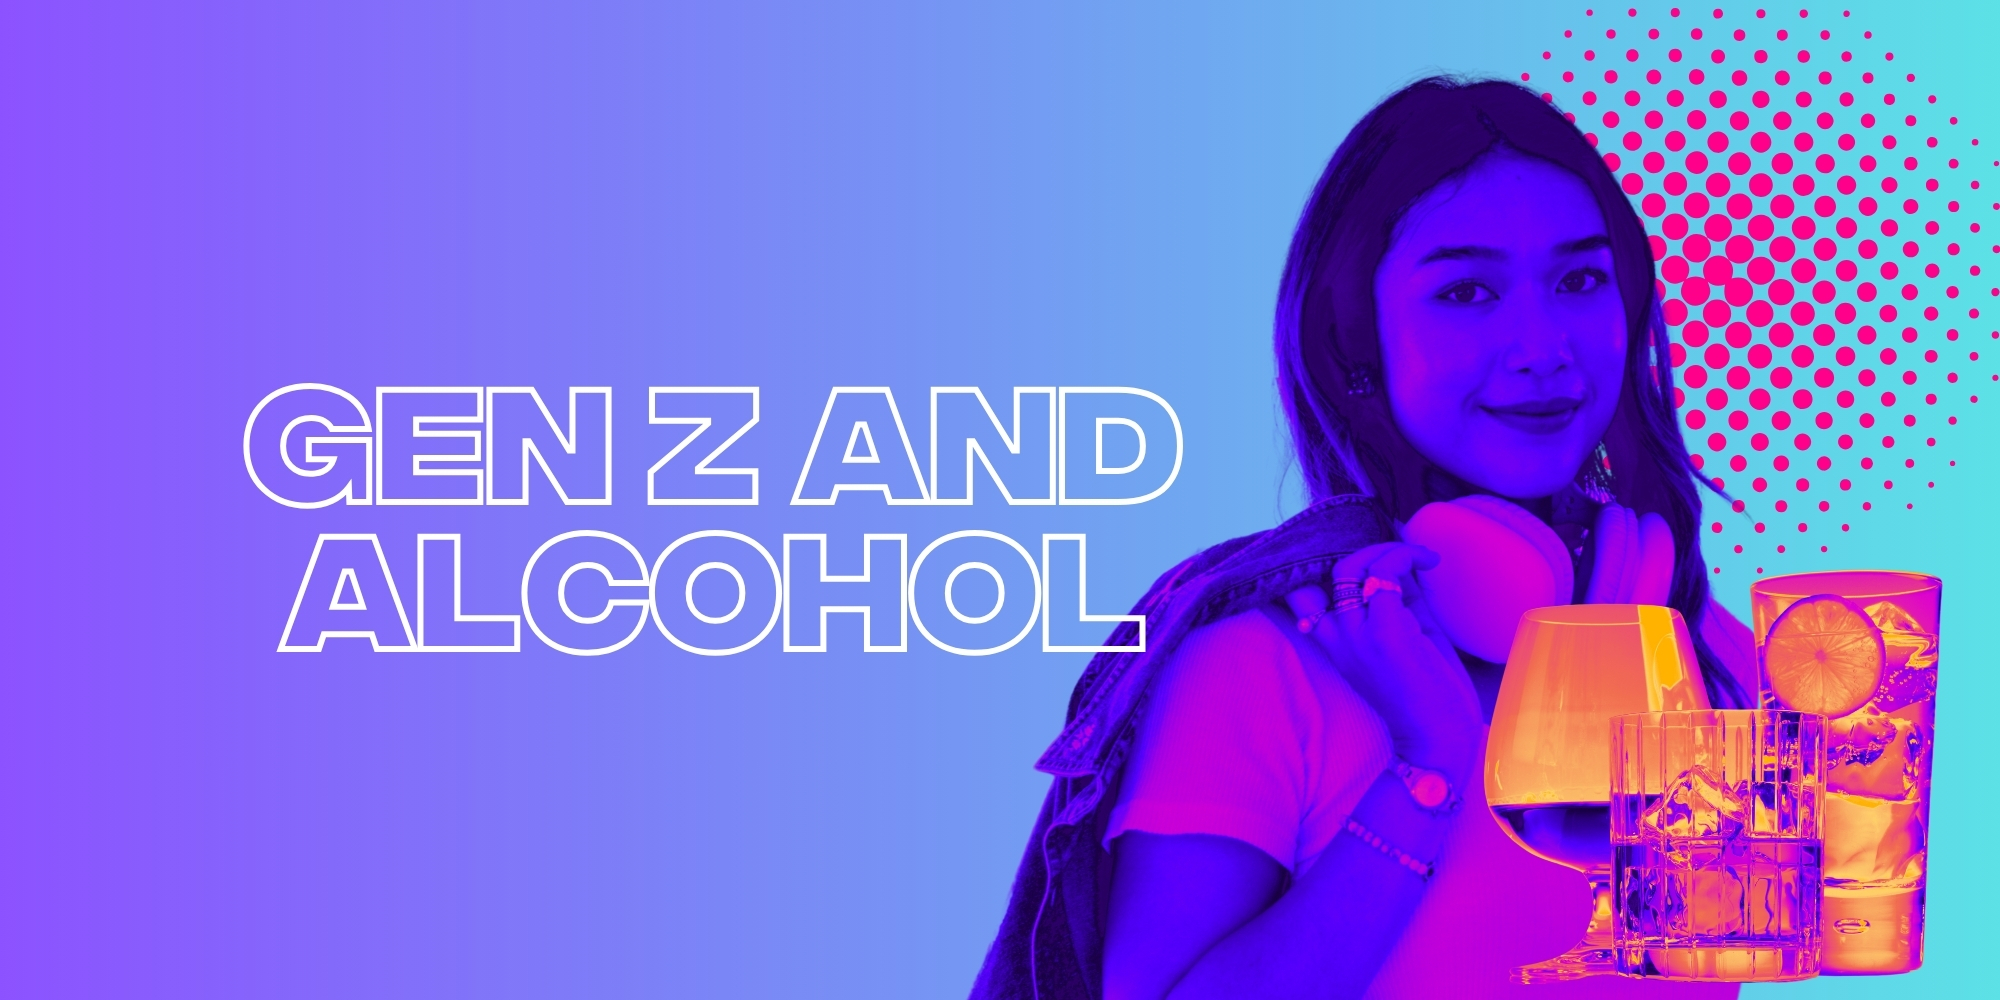 Generation Z And Alcohol: How Can Brands Target A Generation That Doesn’t Drink?